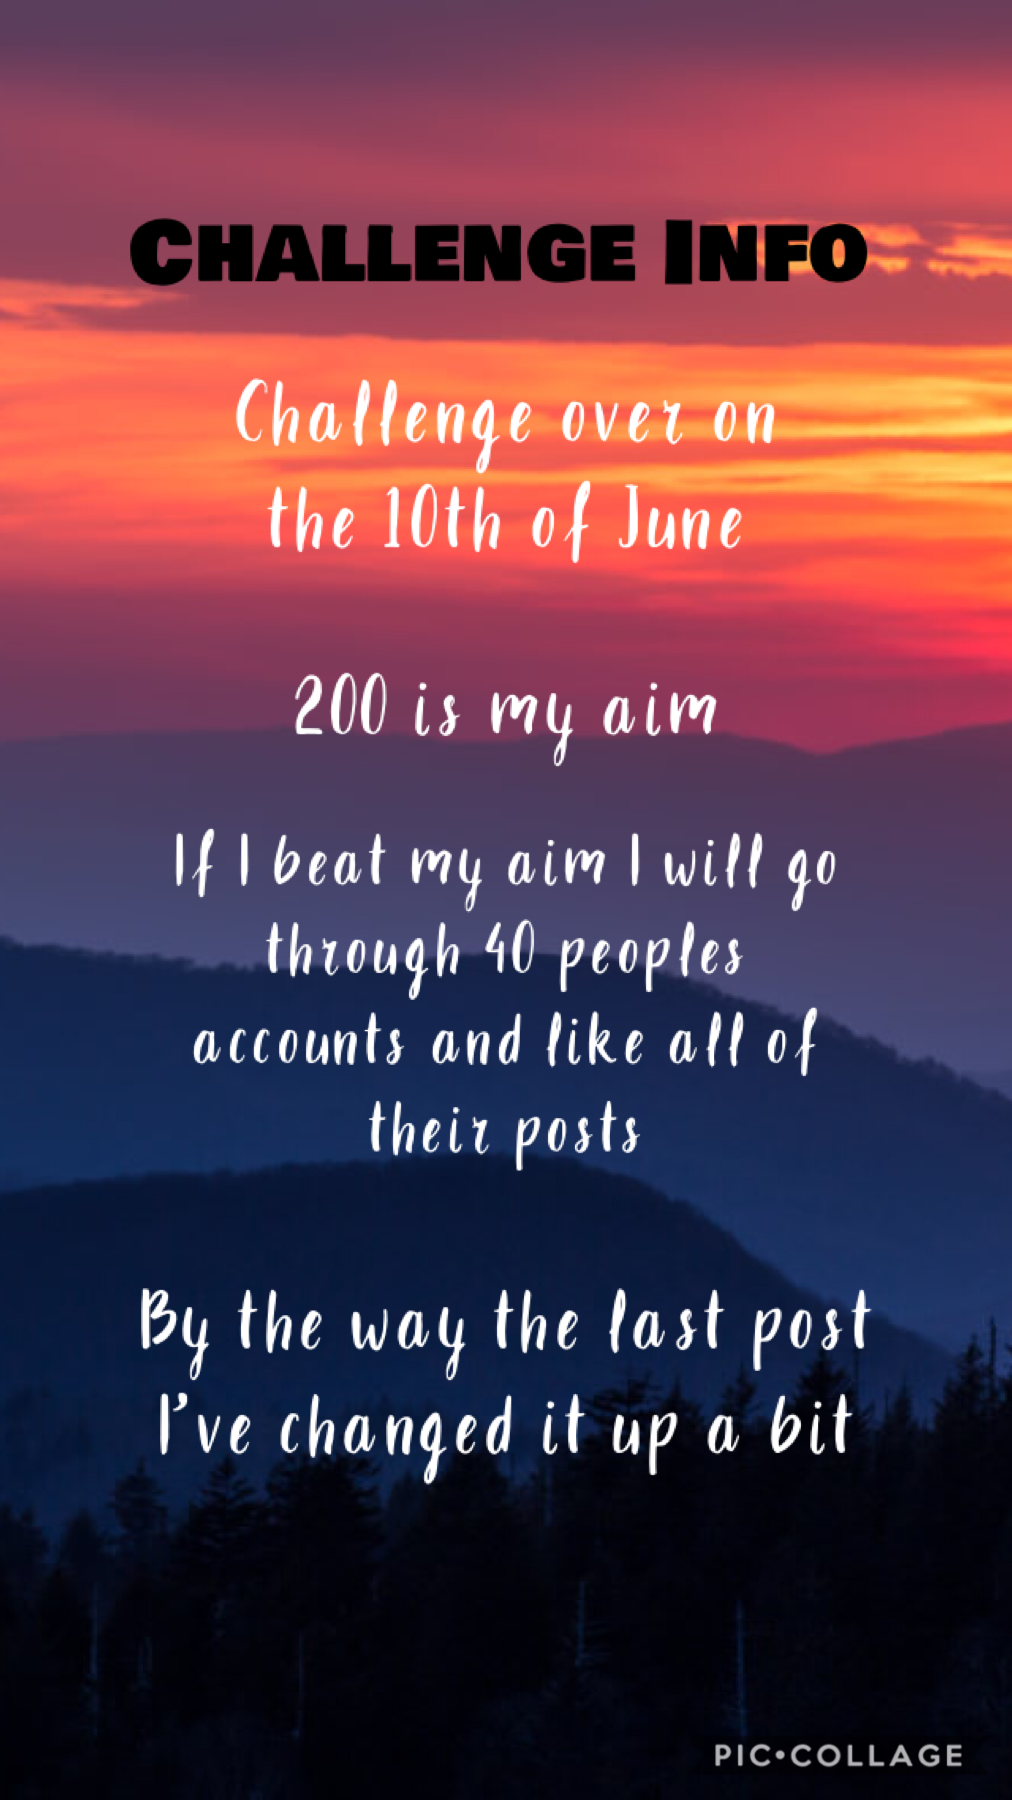 Info for 200 challenge